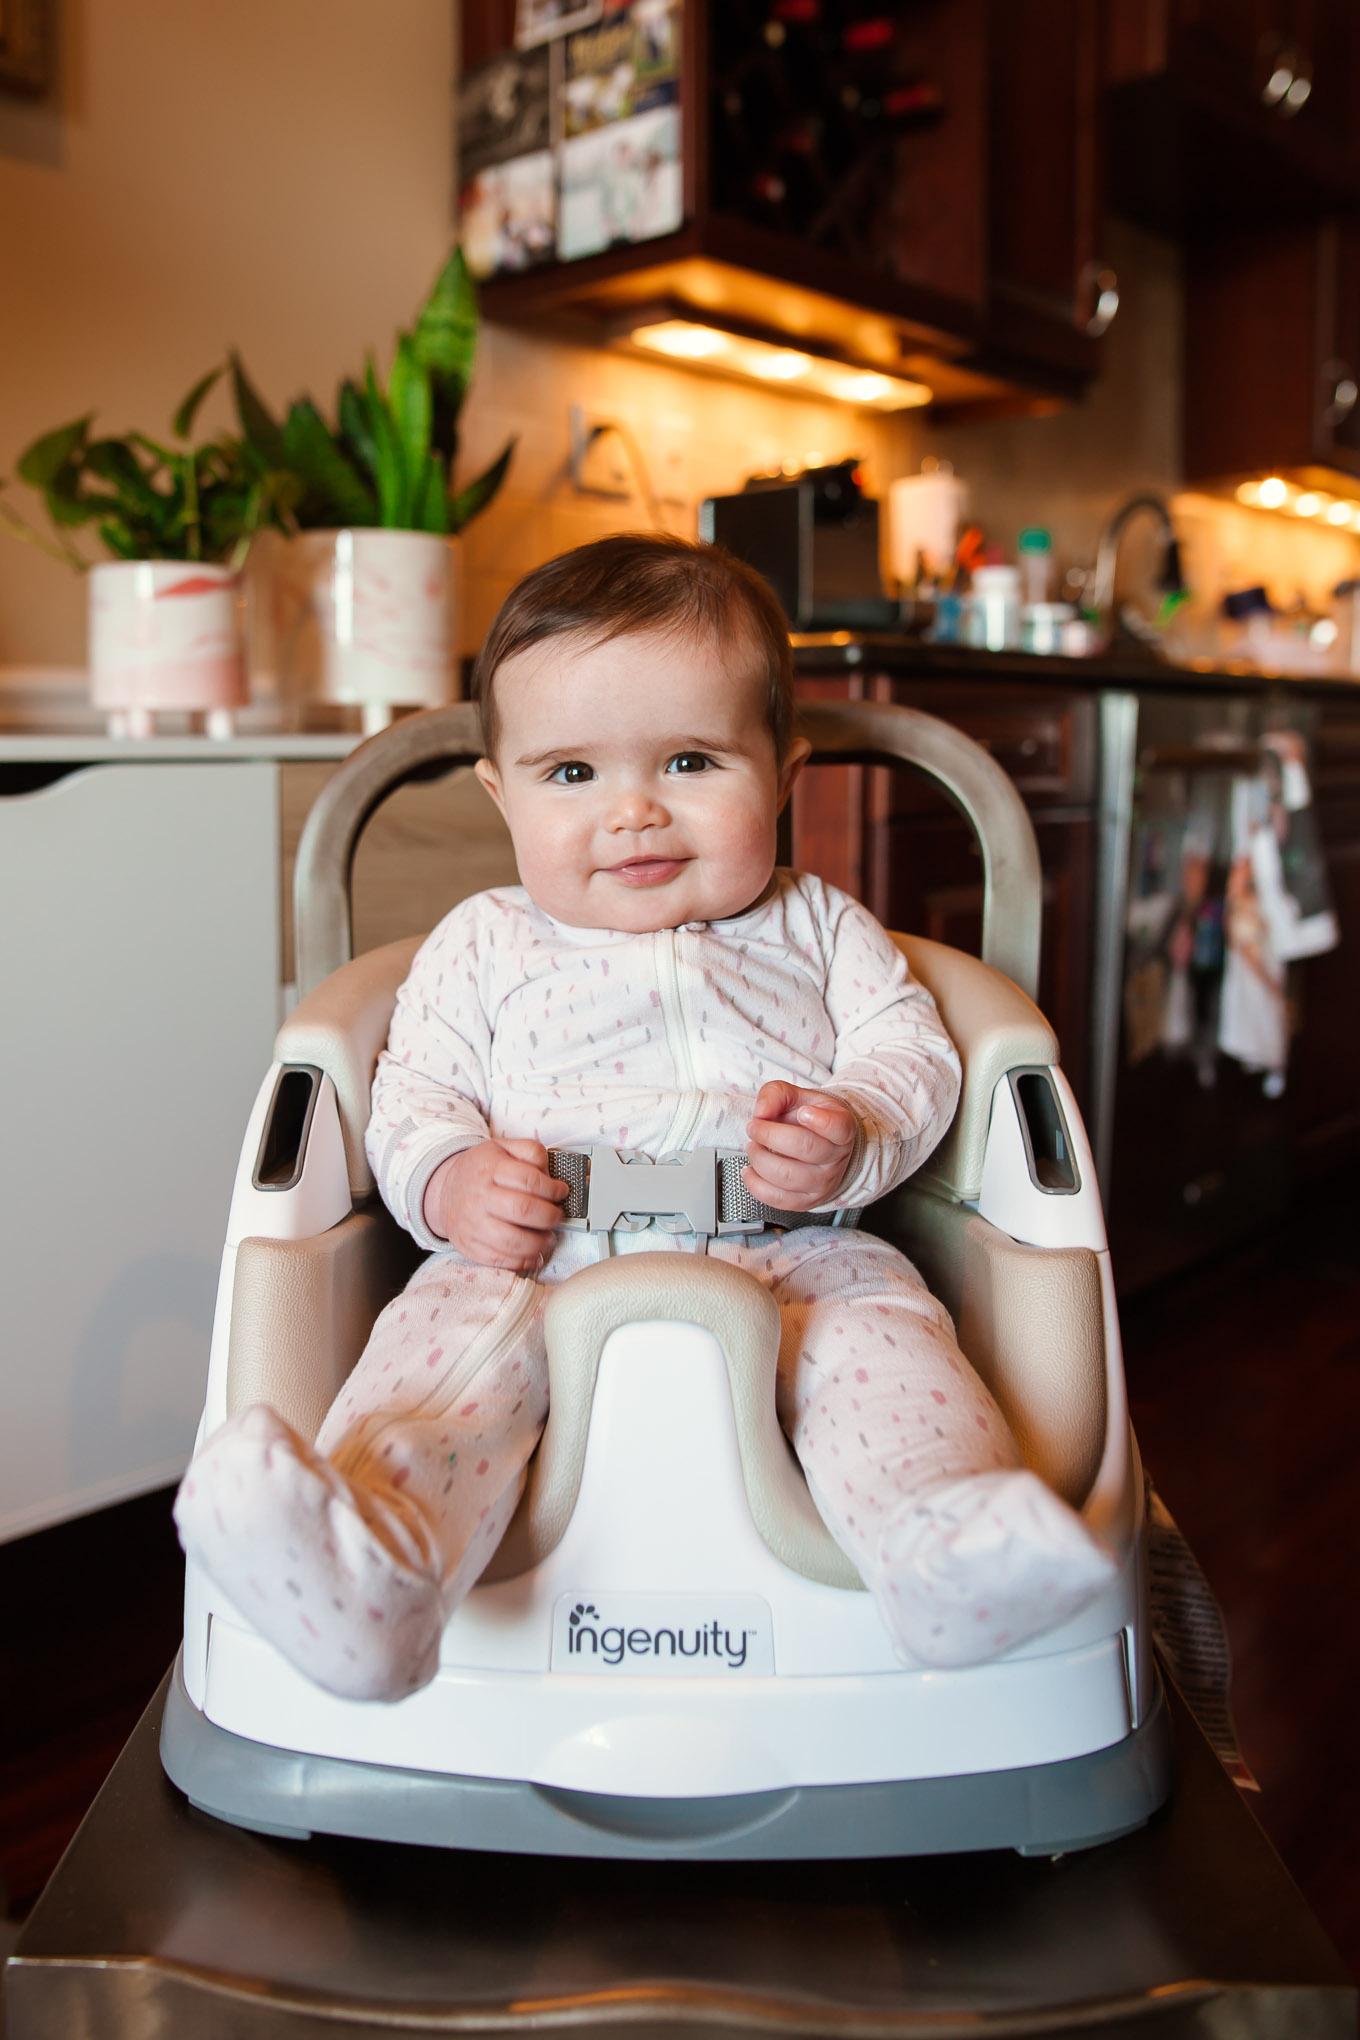 Ingenuity Baby Seat by popular Chicago mommy blog, Glass of Glam: image of a baby sitting in a Ingenuity baby seat.